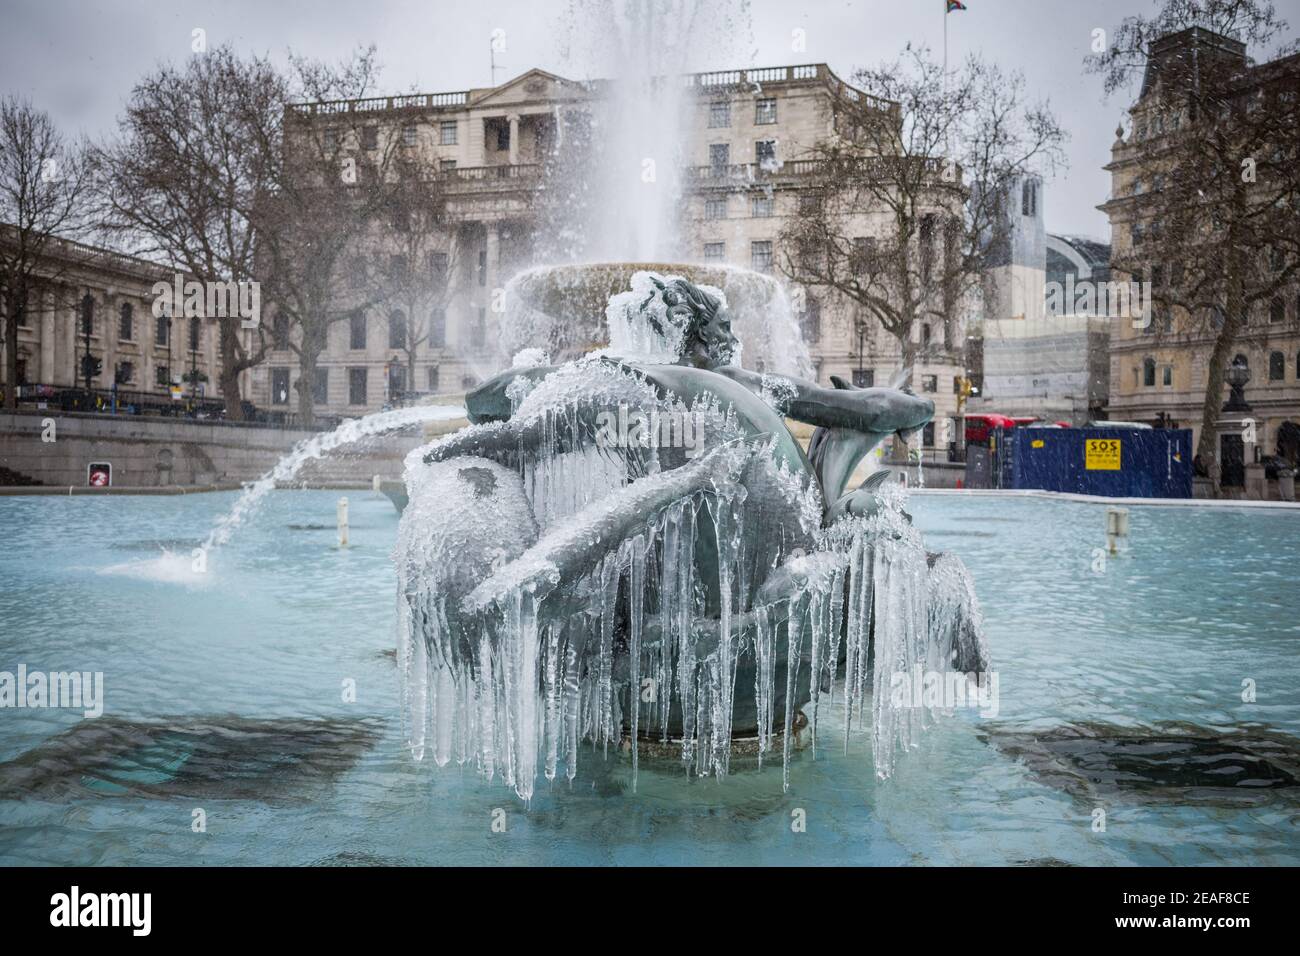 UK Weather: Storm Darcy: Icicles hang from the mermaid fountain statues in Trafalgar Square, London, UK. Stock Photo